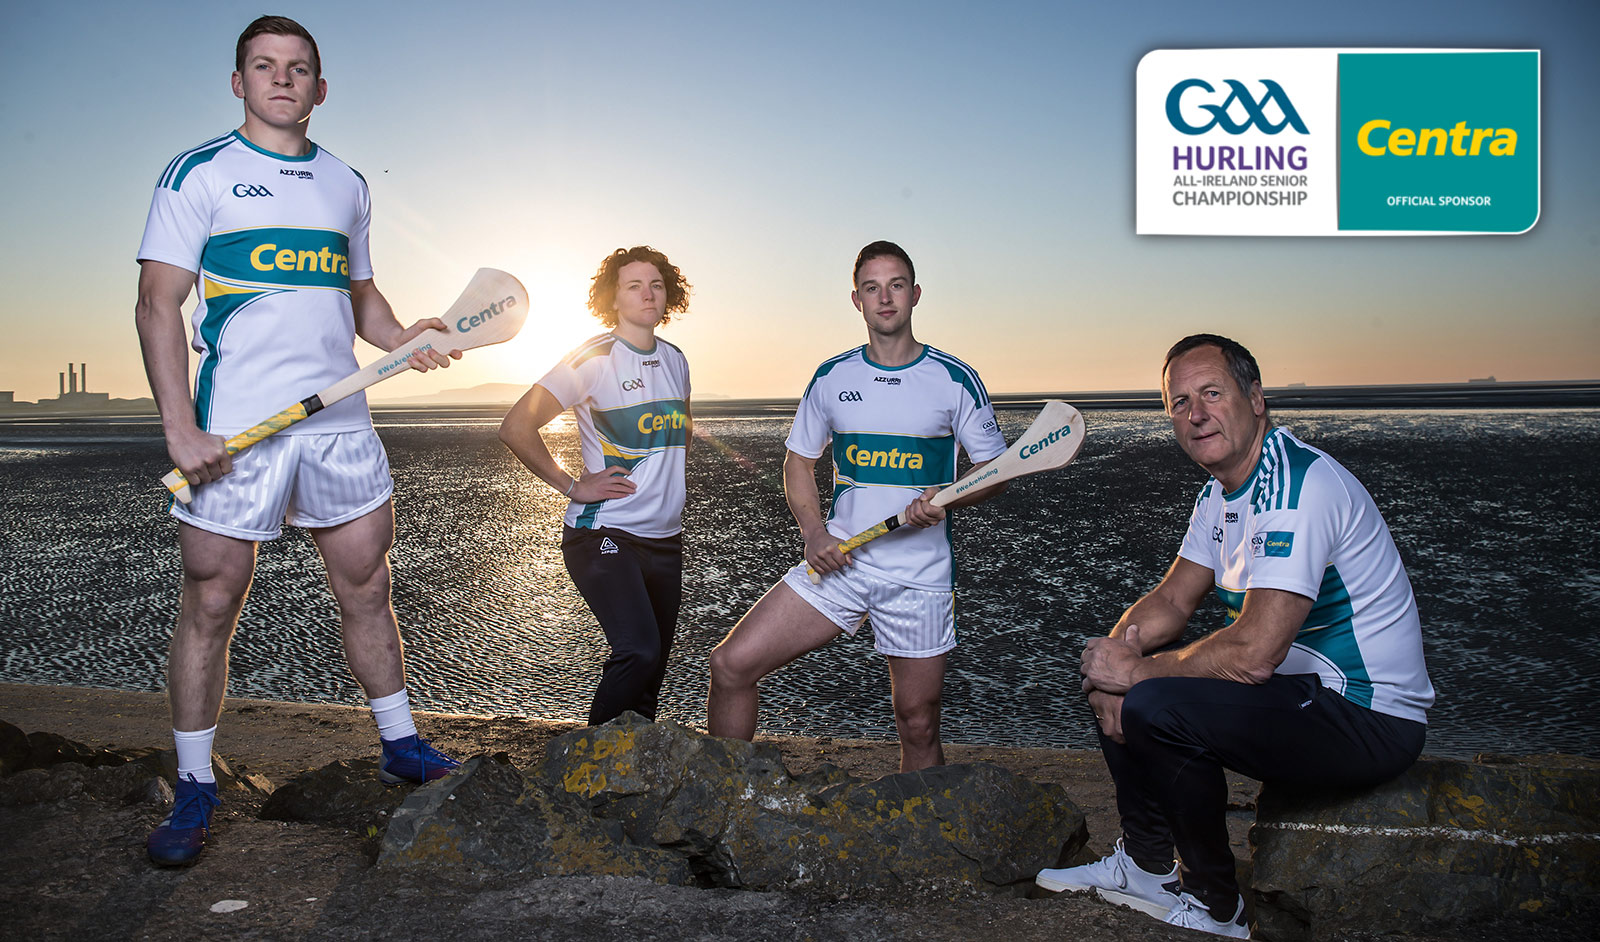 Centra will reveal what's Behind the Helmet some of the GAA All Senior Hurling Championship's best-known hurlers and support teams. - Centra